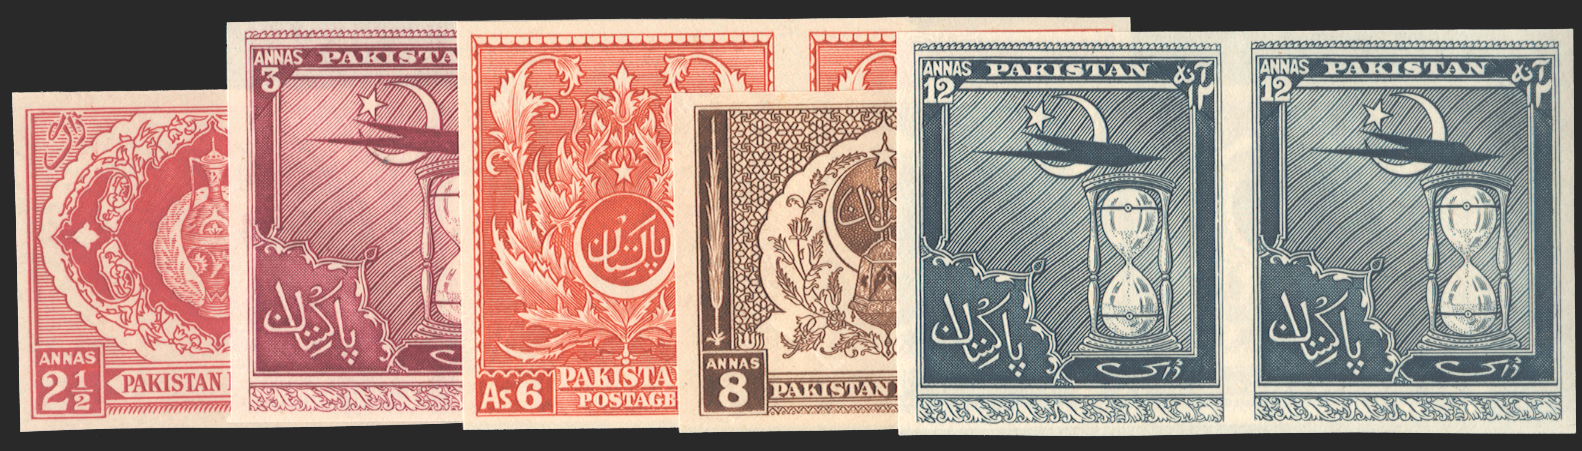 PAKISTAN 1951-56 'Fourth Anniversary of Independence set of five proofs, SG55/62